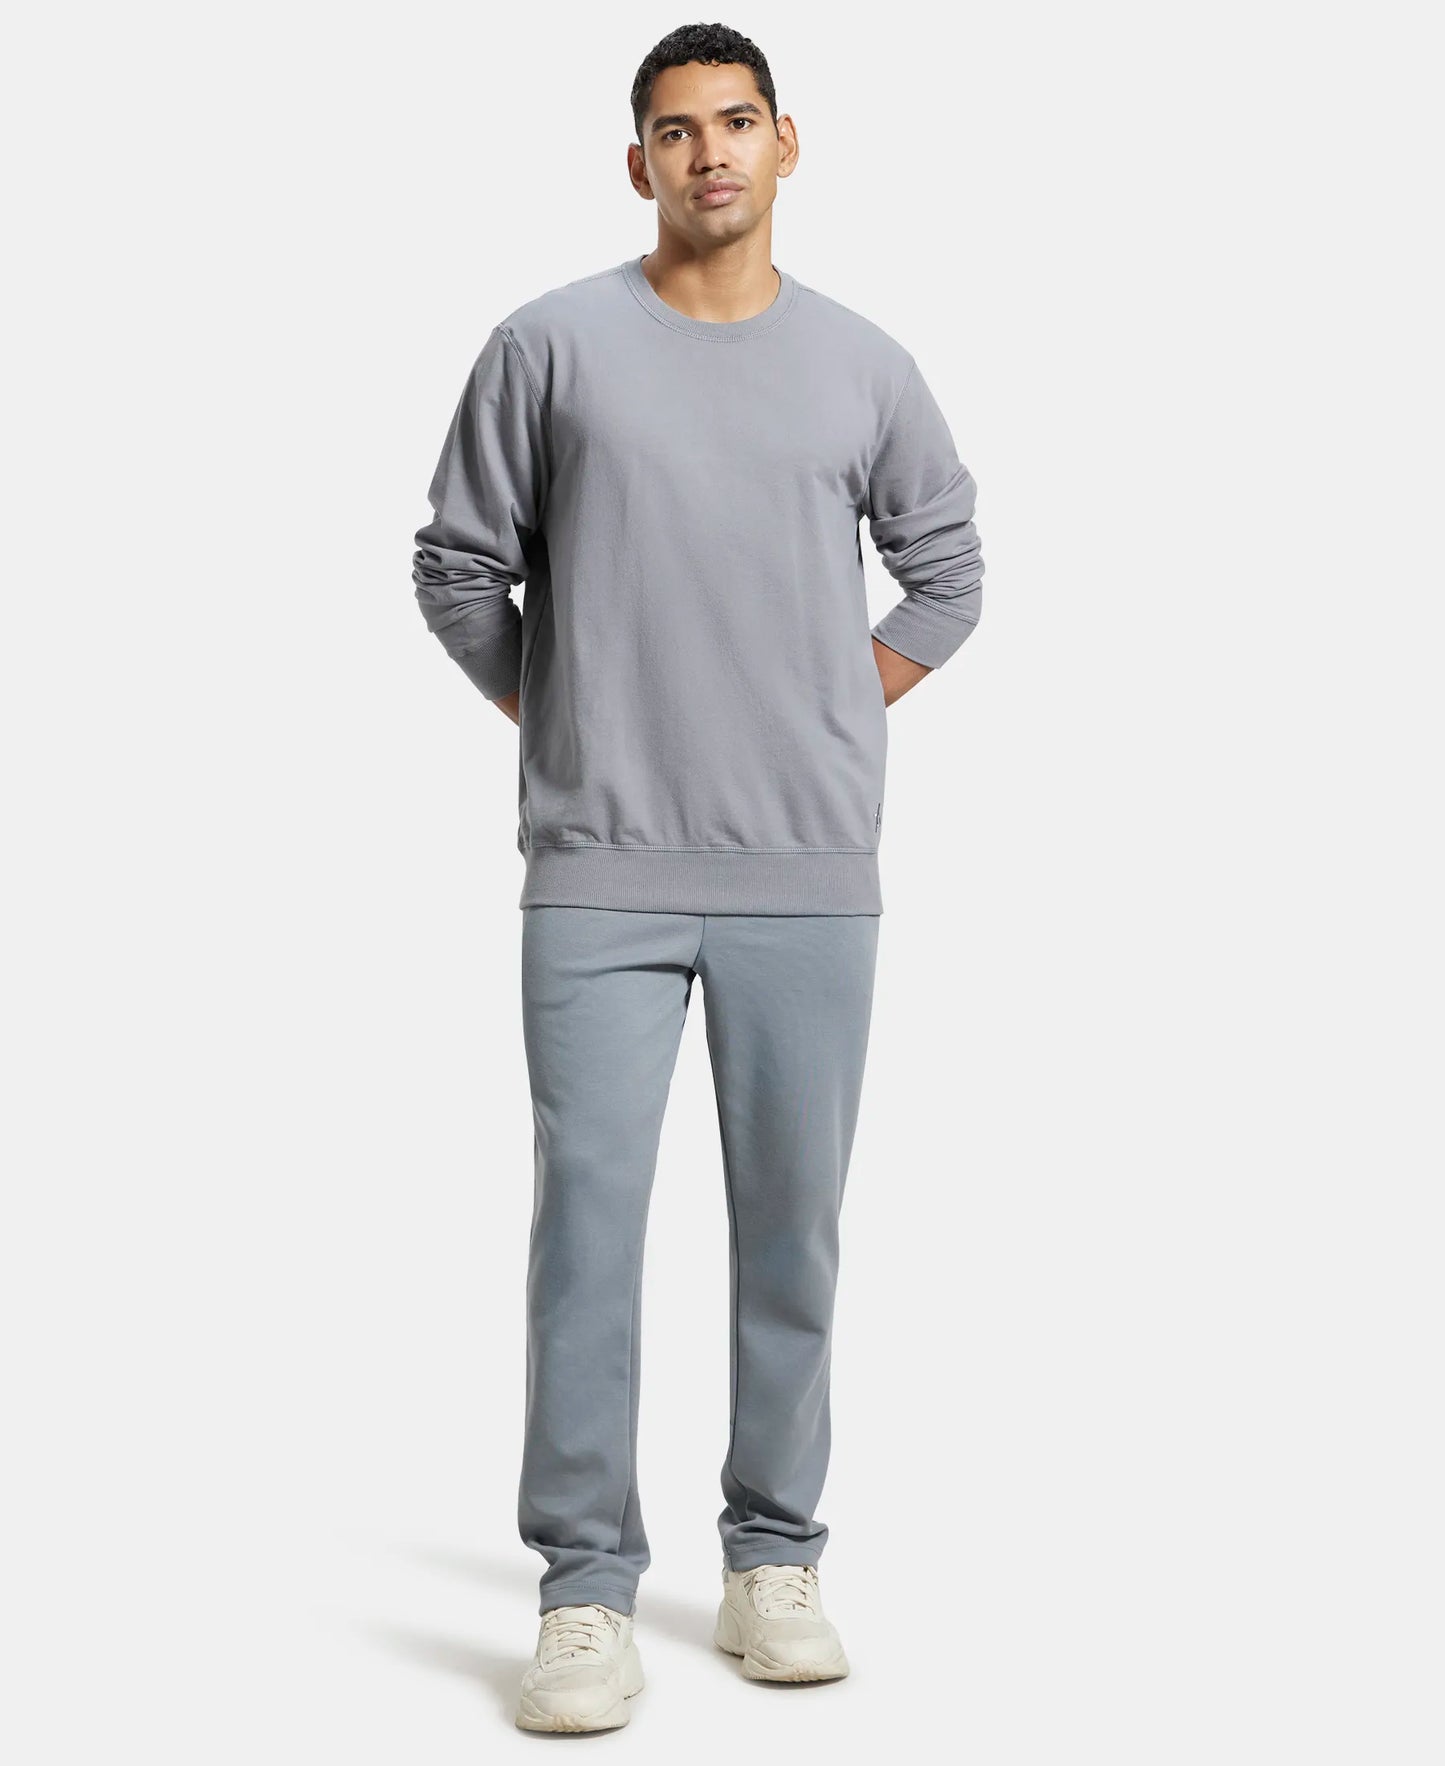 Super Combed Cotton French Terry Solid Sweatshirt with Ribbed Cuffs - Performance Grey-4